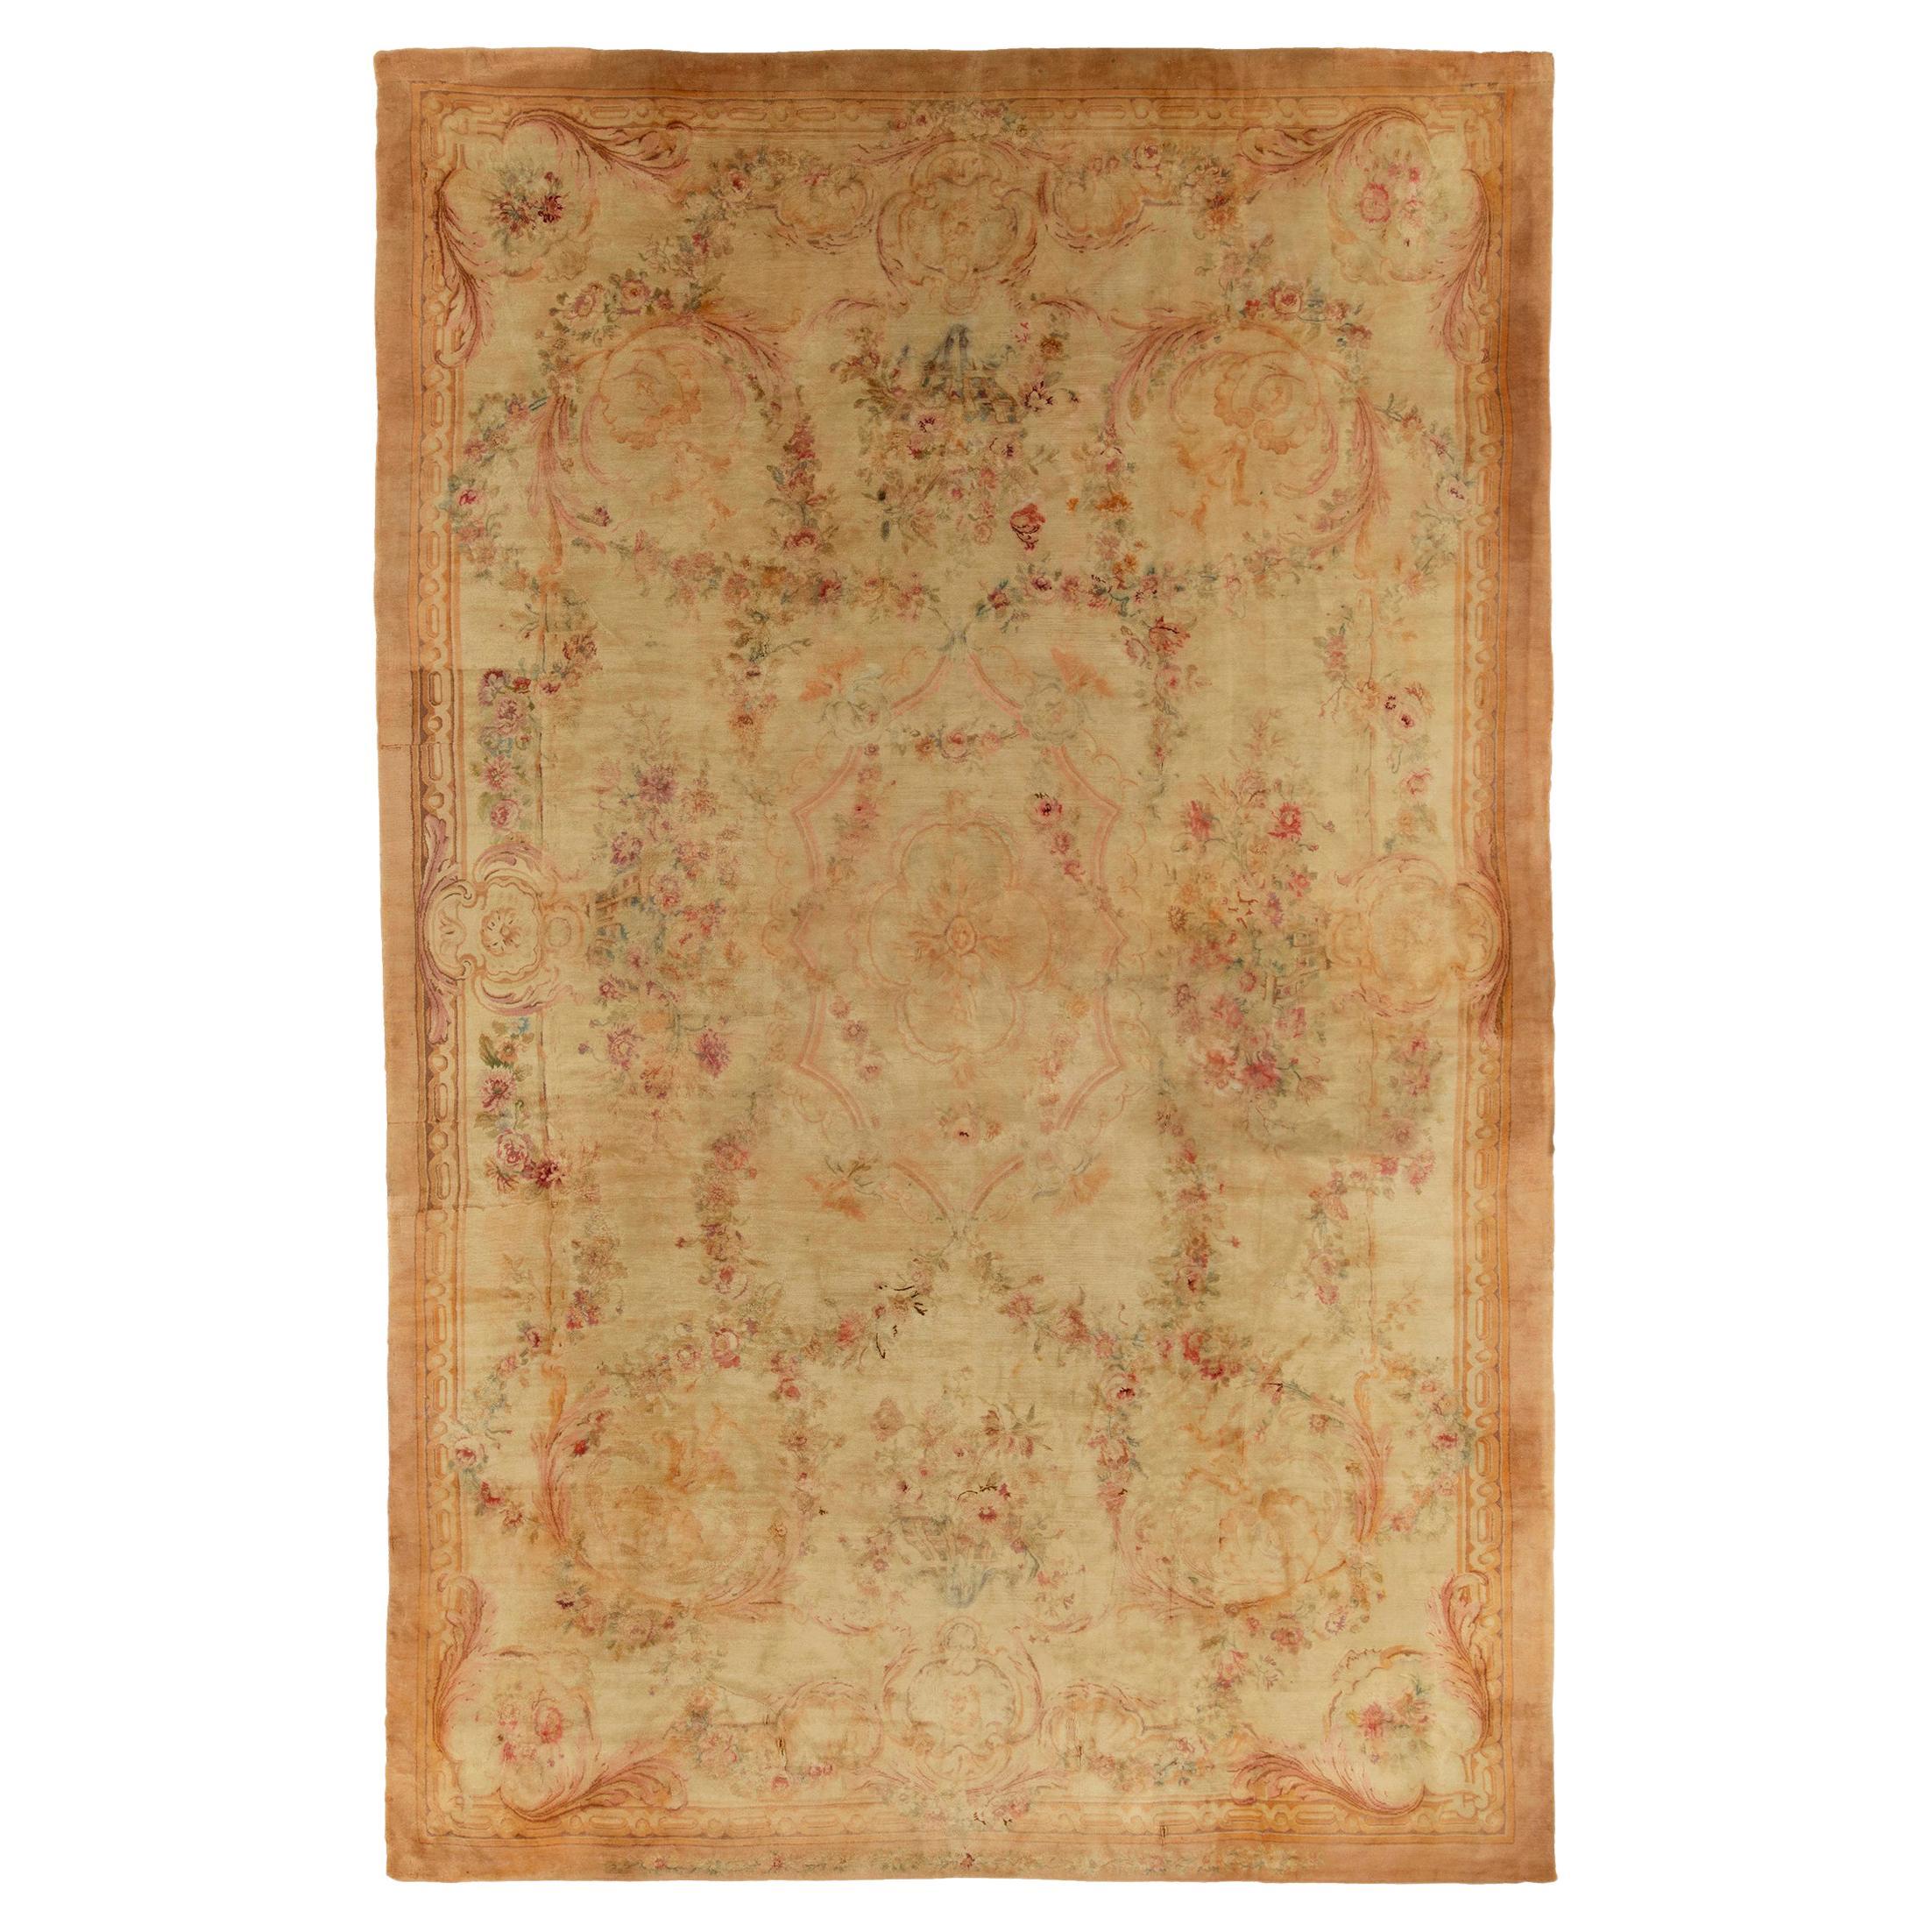 Antique Savonnerie Rug in All over Beige-Gold Pink Floral Pattern by Rug & Kilim For Sale